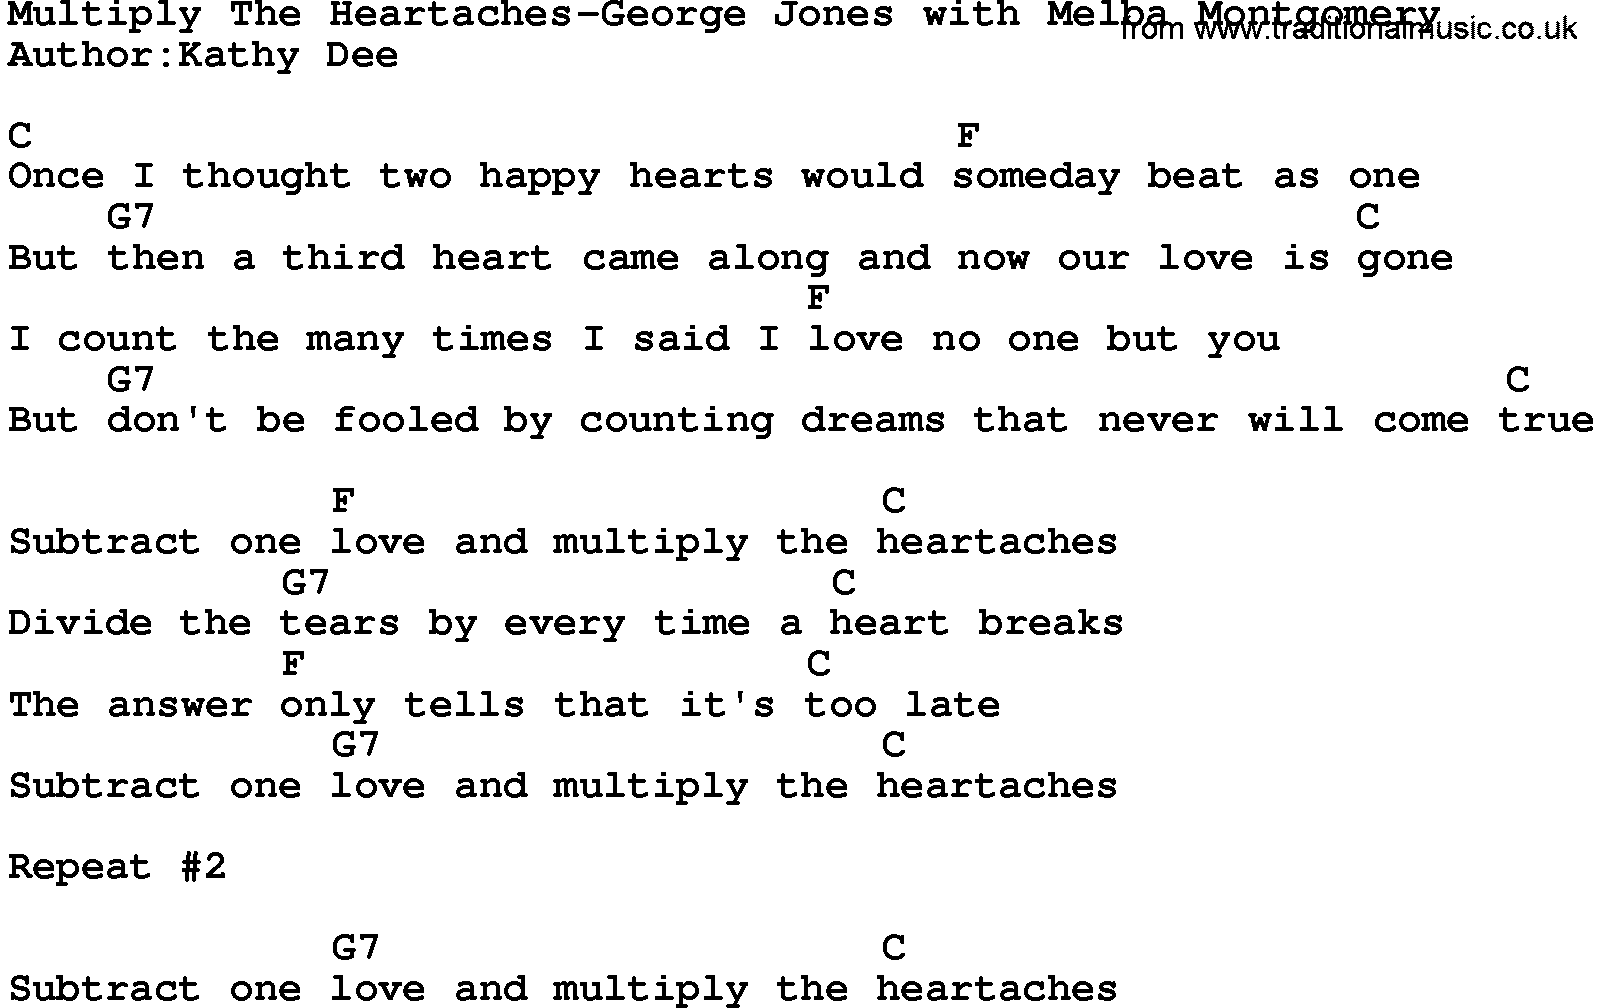 Country music song: Multiply The Heartaches-George Jones With Melba Montgomery lyrics and chords